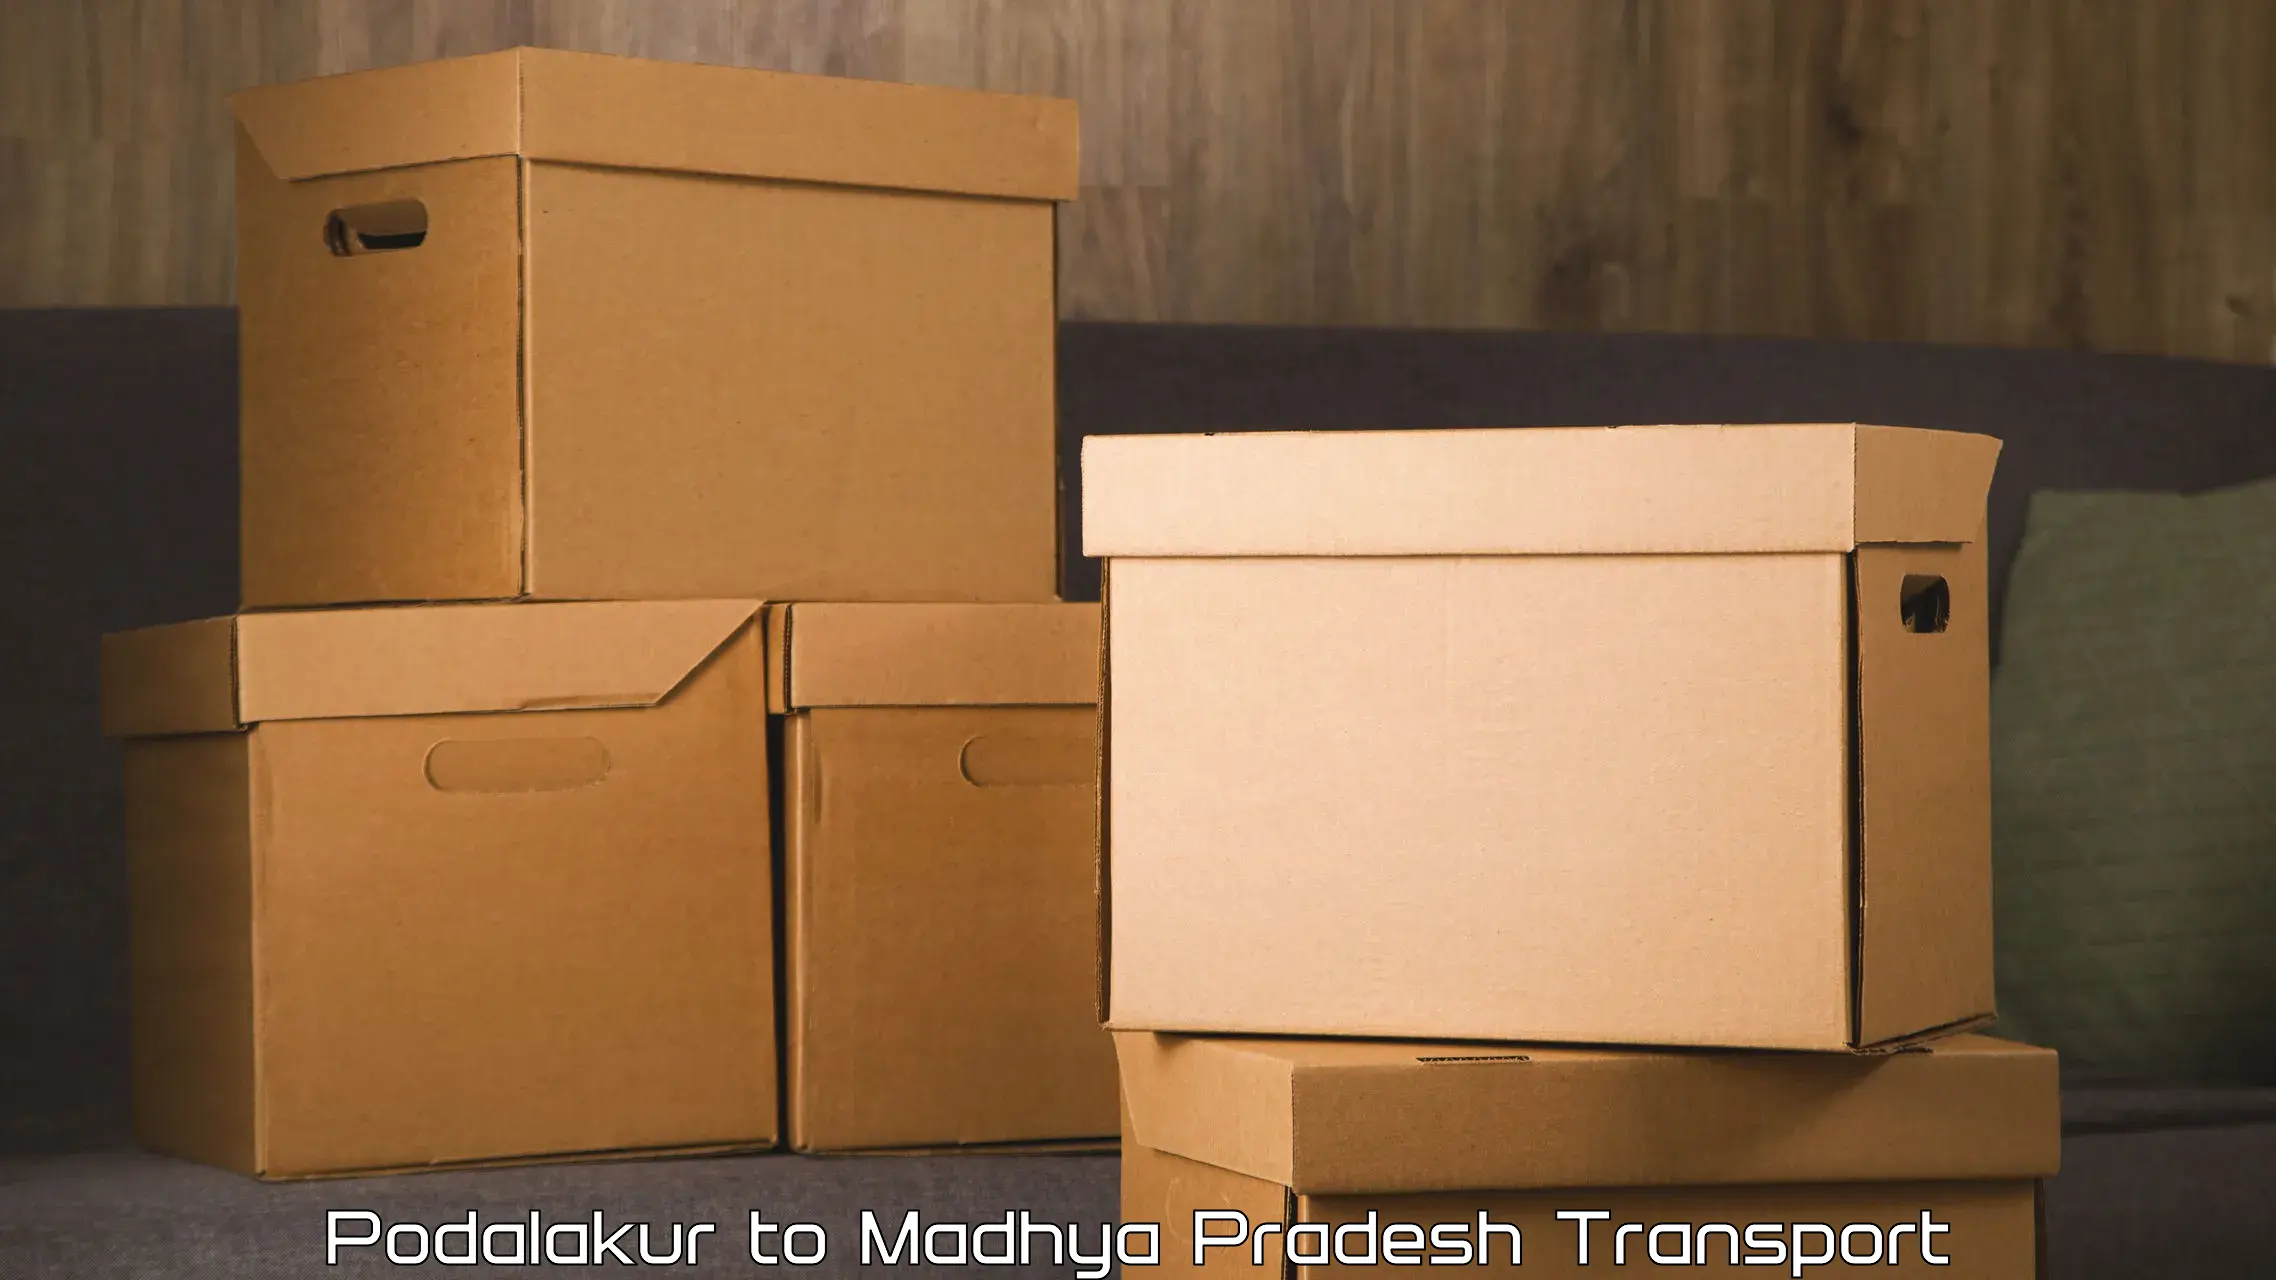 Package delivery services Podalakur to Rampur Naikin